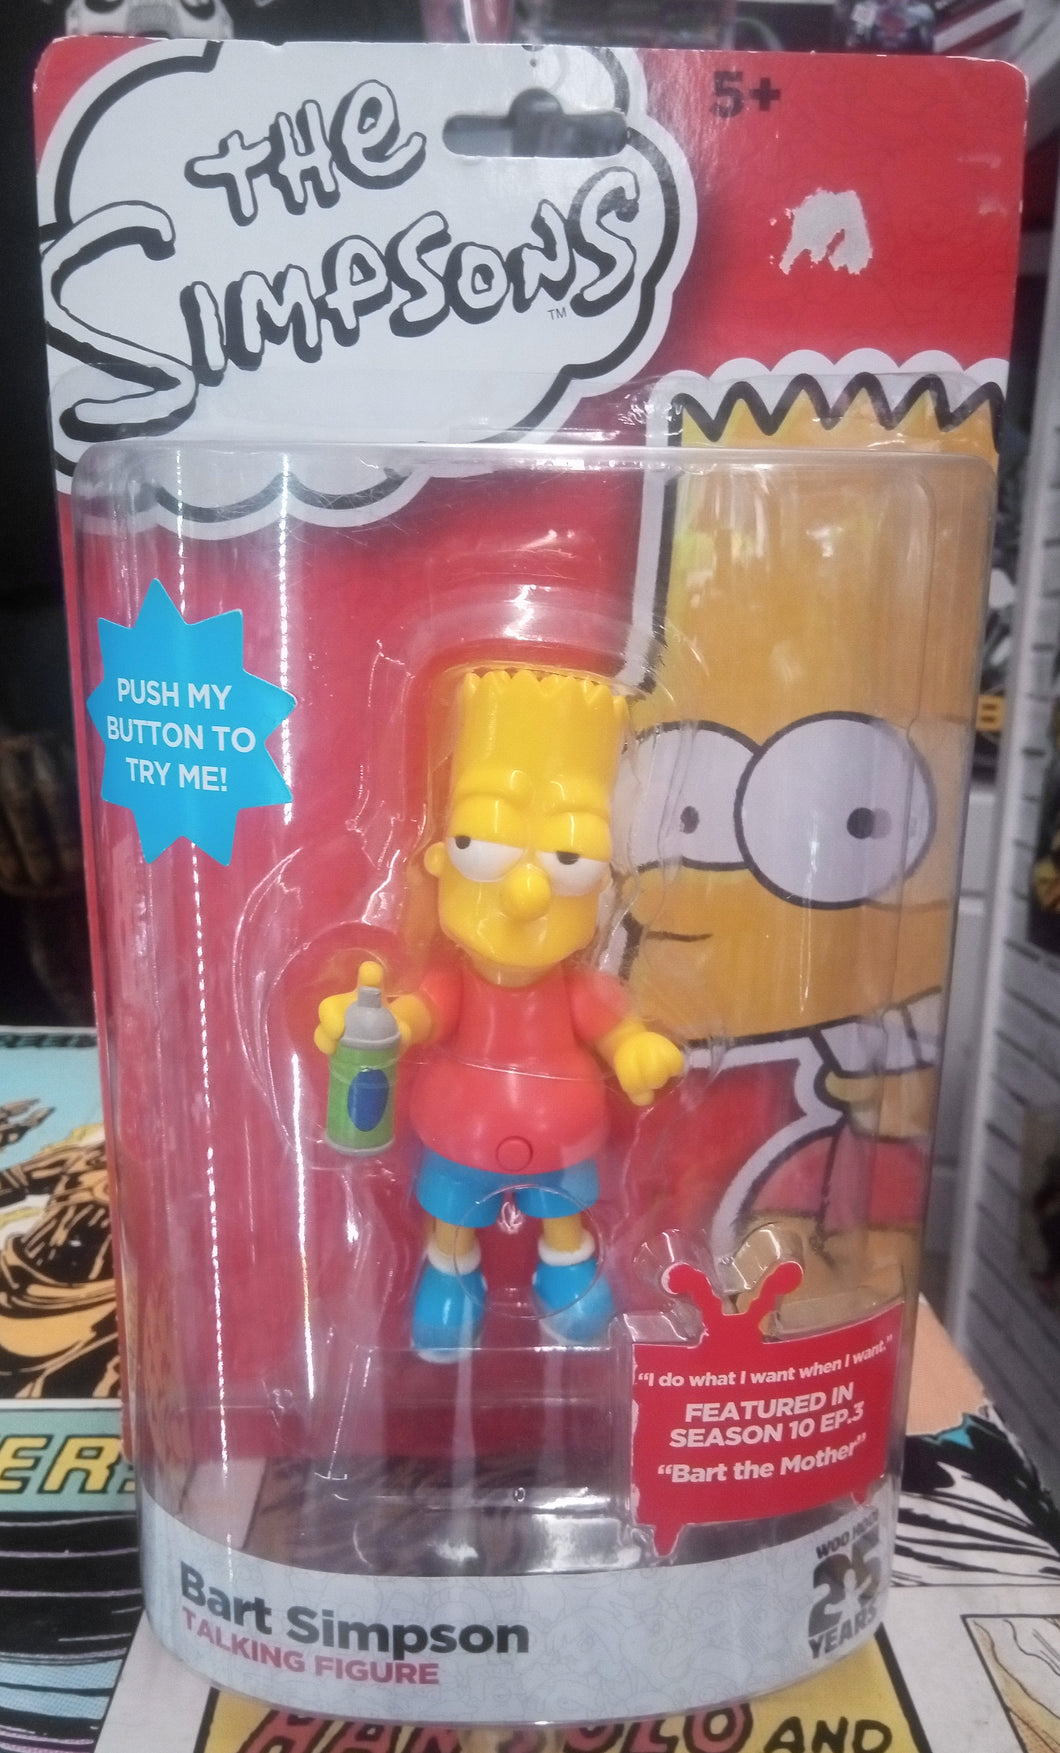 The Simpsons 25th anniversary Bart figure